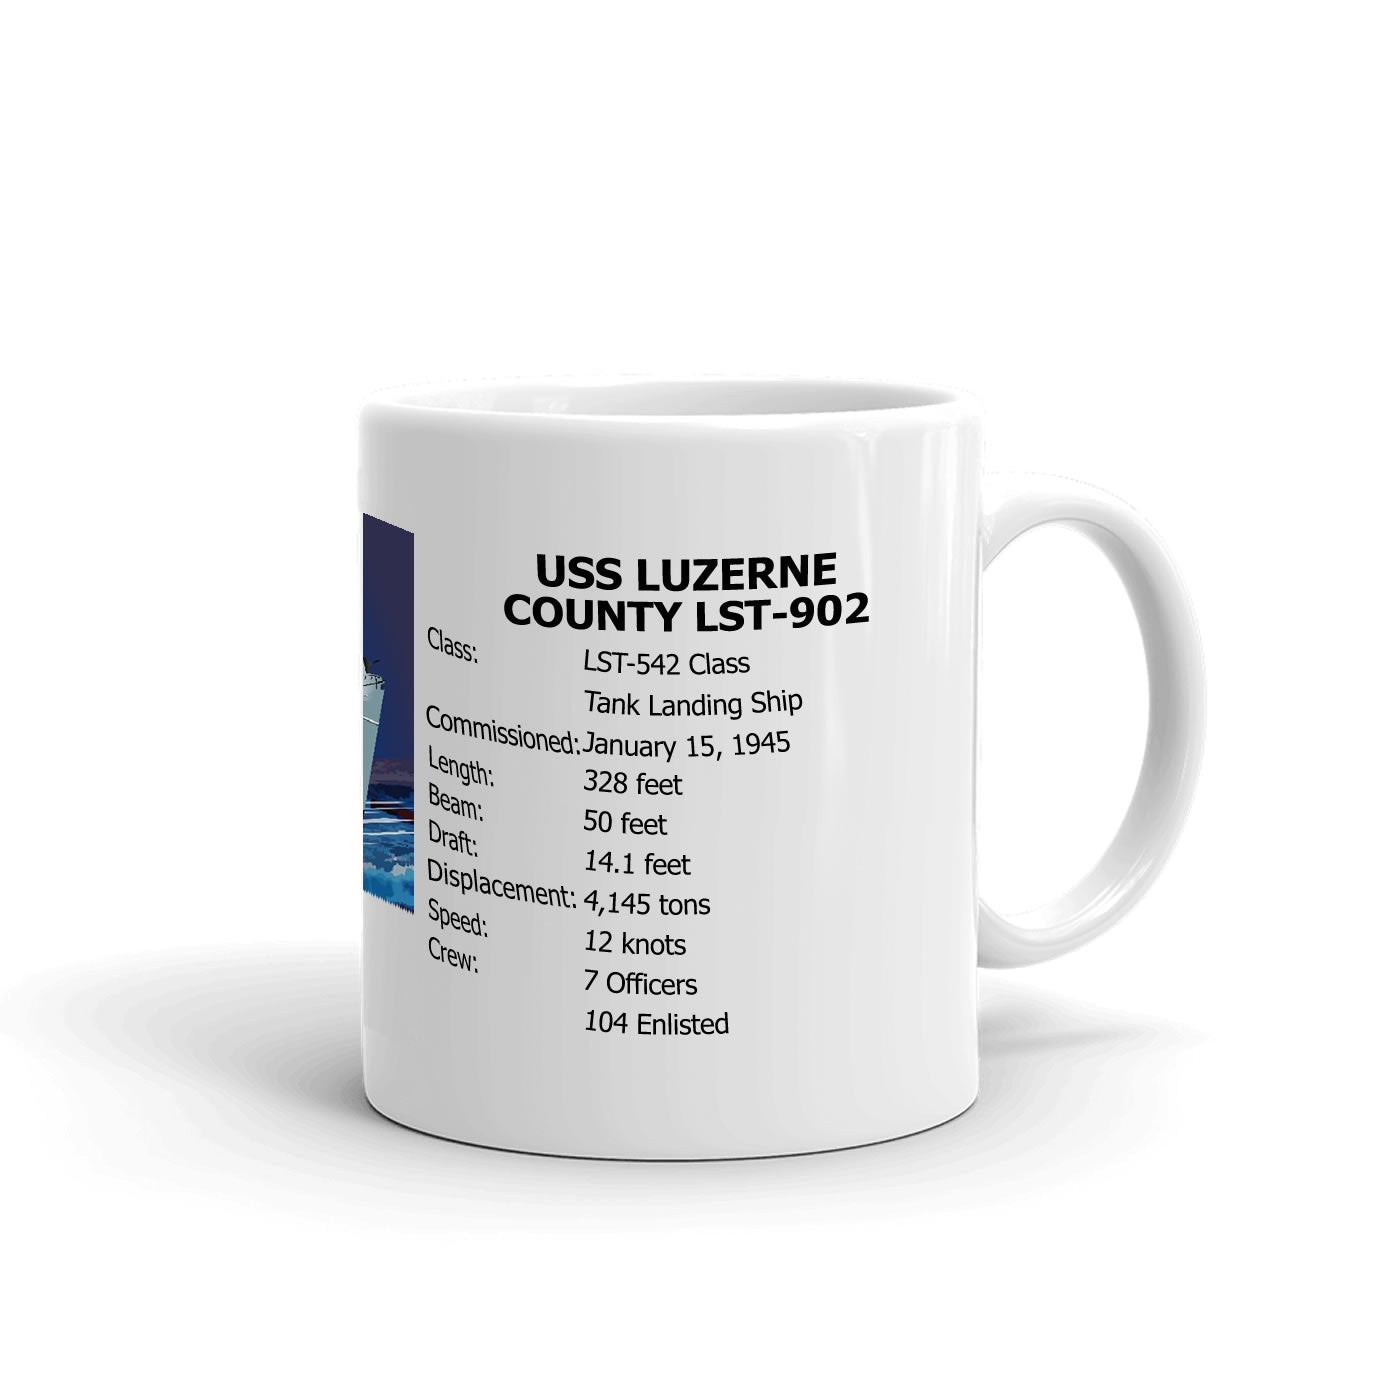 USS Luzerne County LST-902 Coffee Cup Mug Right Handle